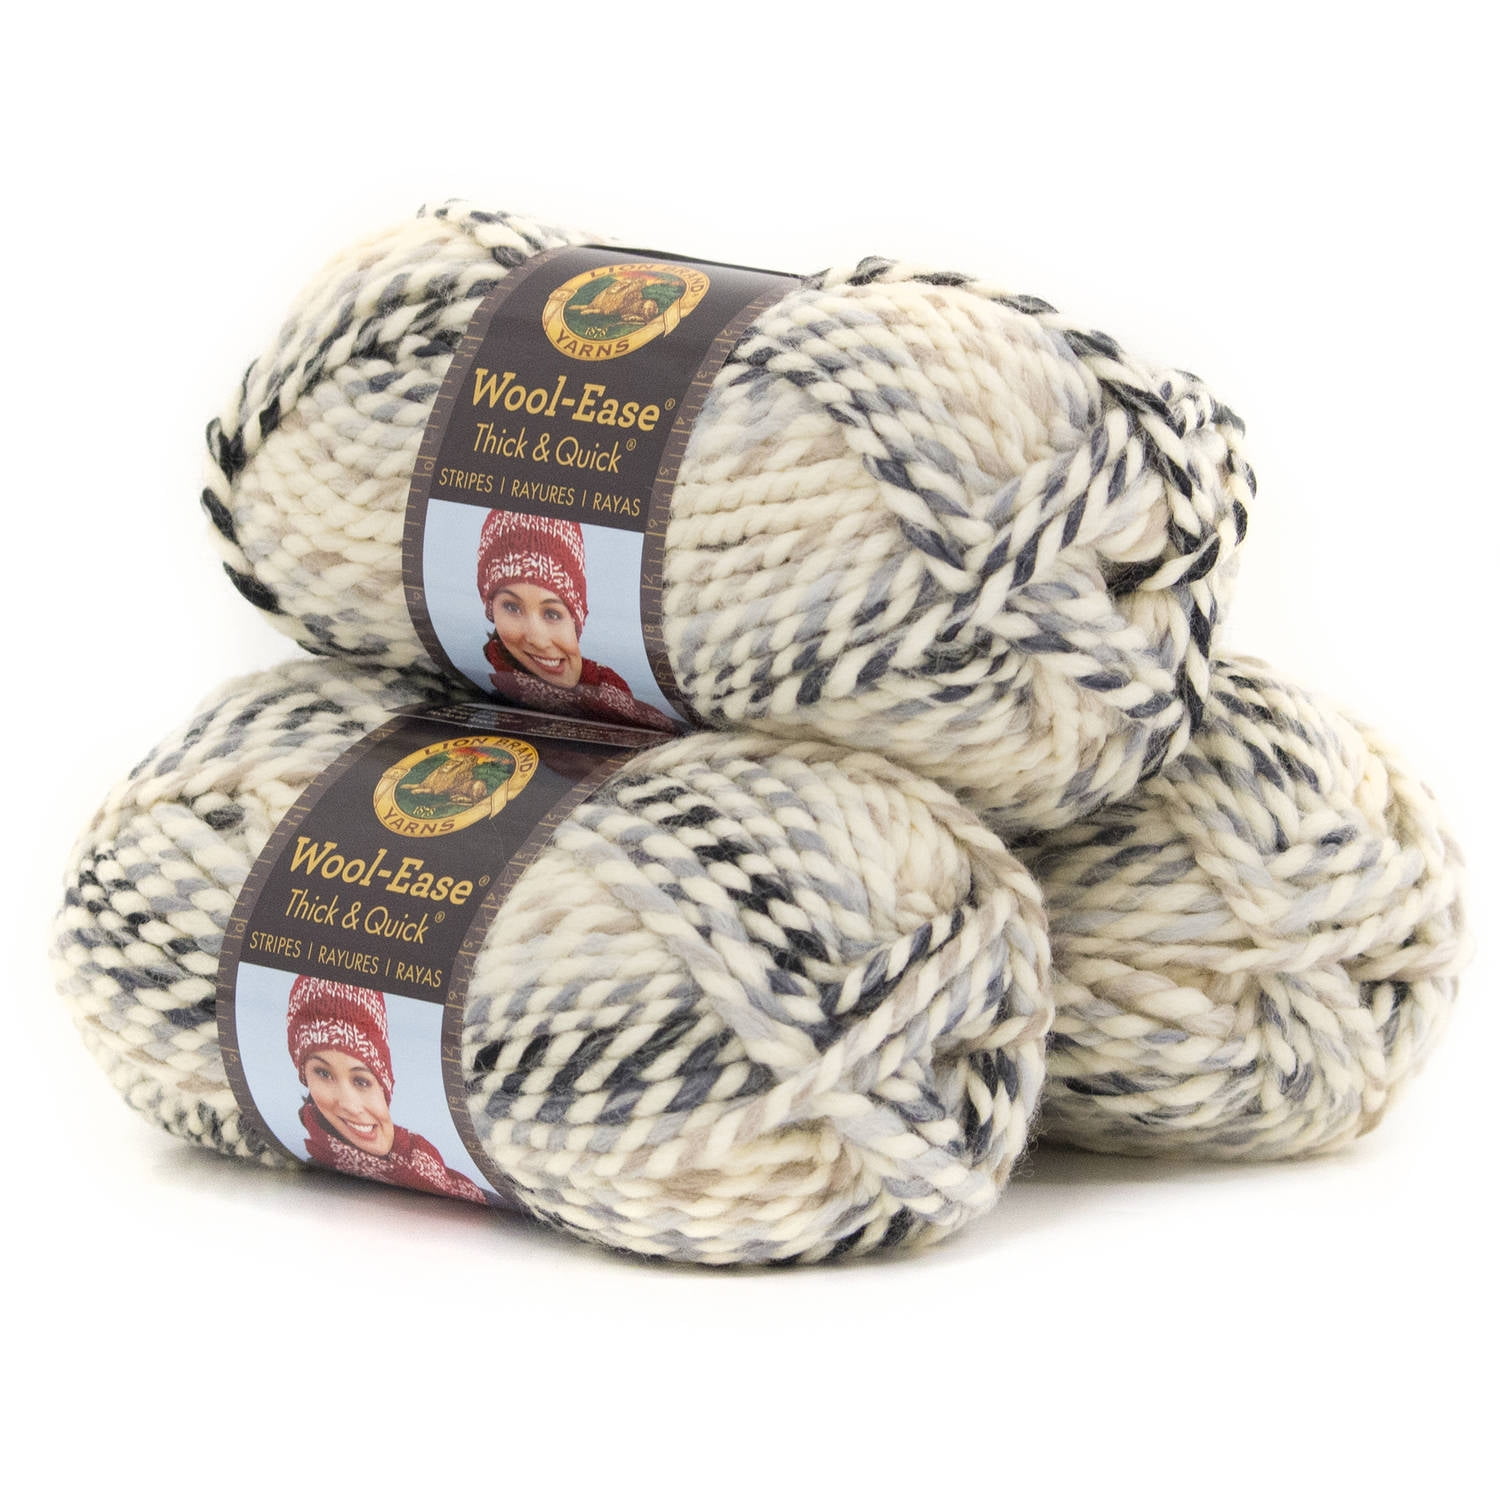 Lion Brand Yarn Wool-Ease Thick and Quick Moonlight Classic Super Bulky  Acrylic, Wool Multi-color Yarn 3 Pack 